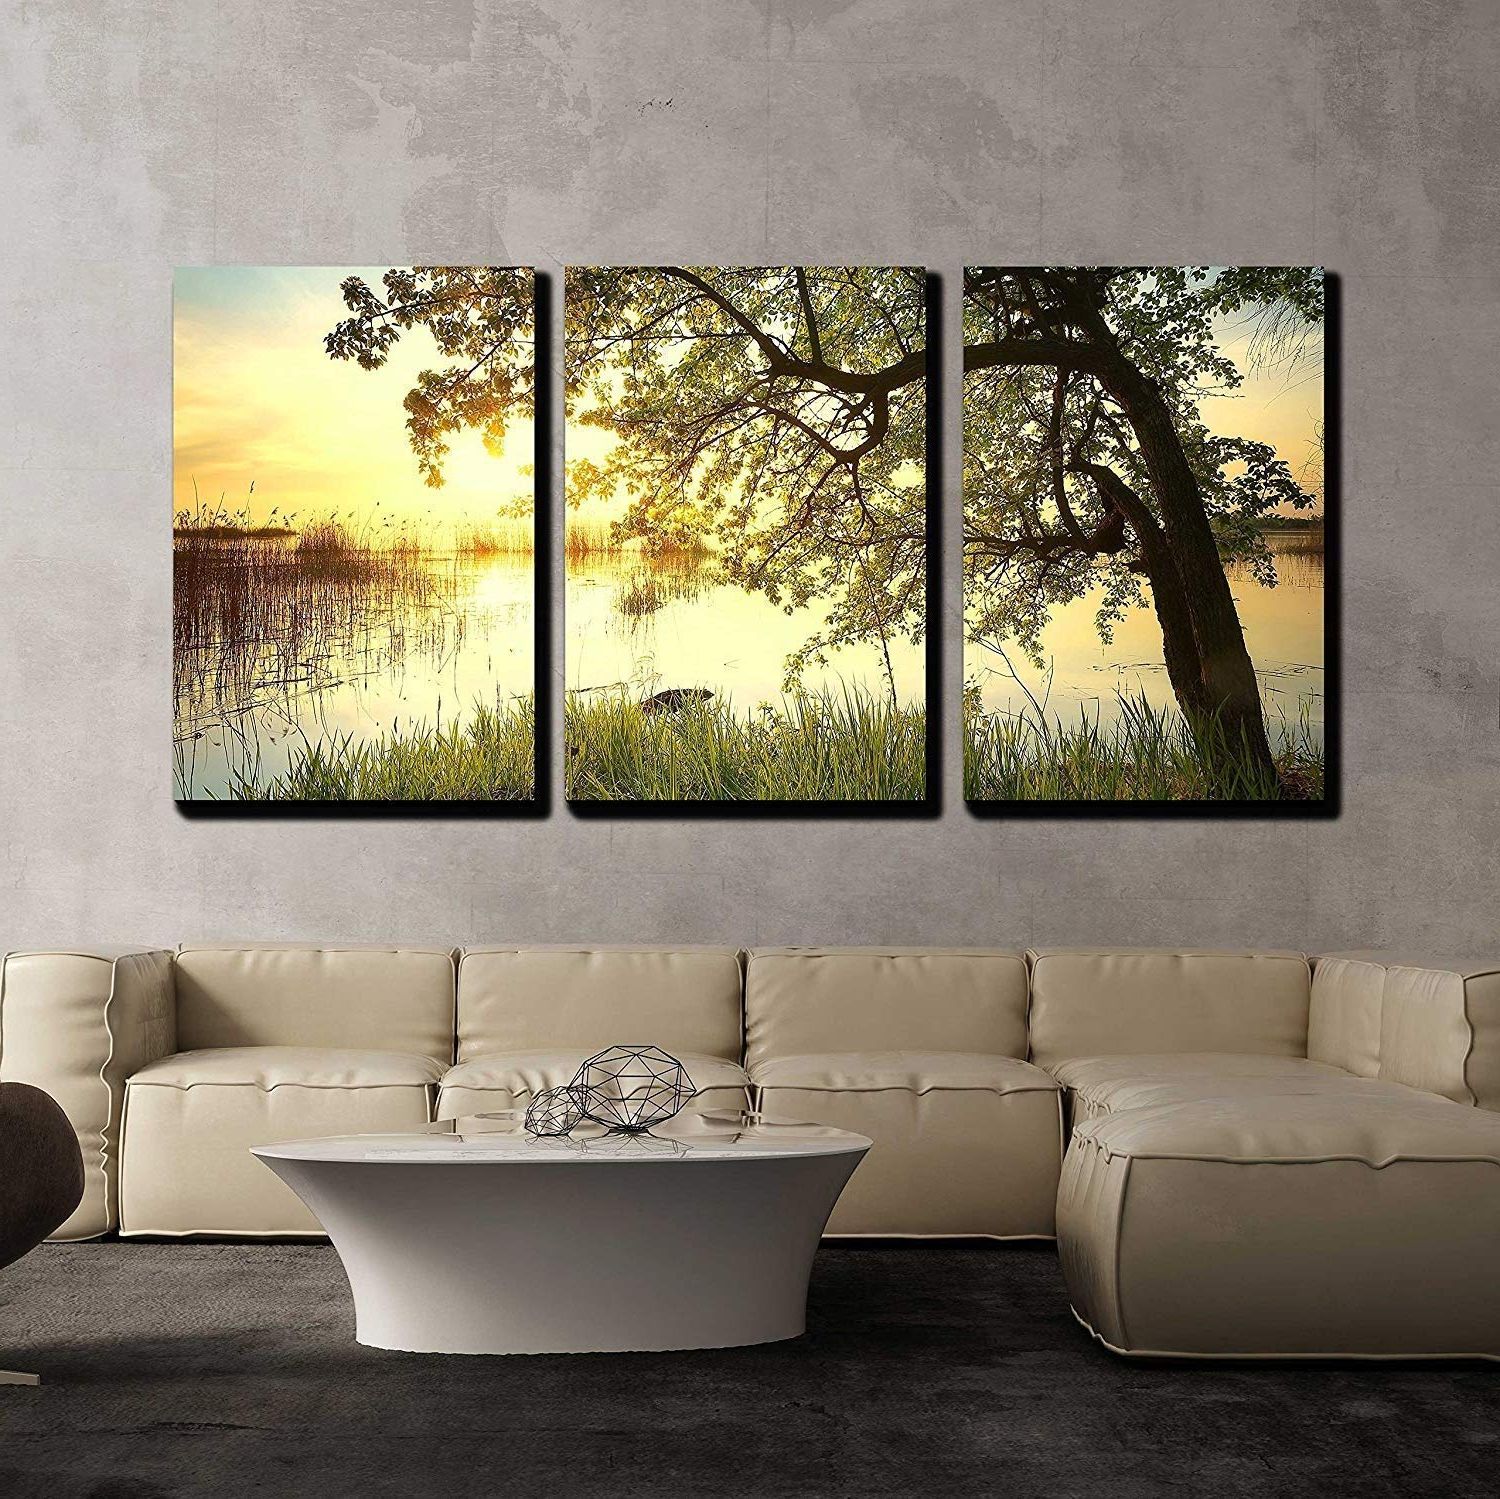 Wall26 – 3 Piece Canvas Wall Art – Tree Near Lake During Throughout Best And Newest Sunset Wall Art (View 9 of 20)